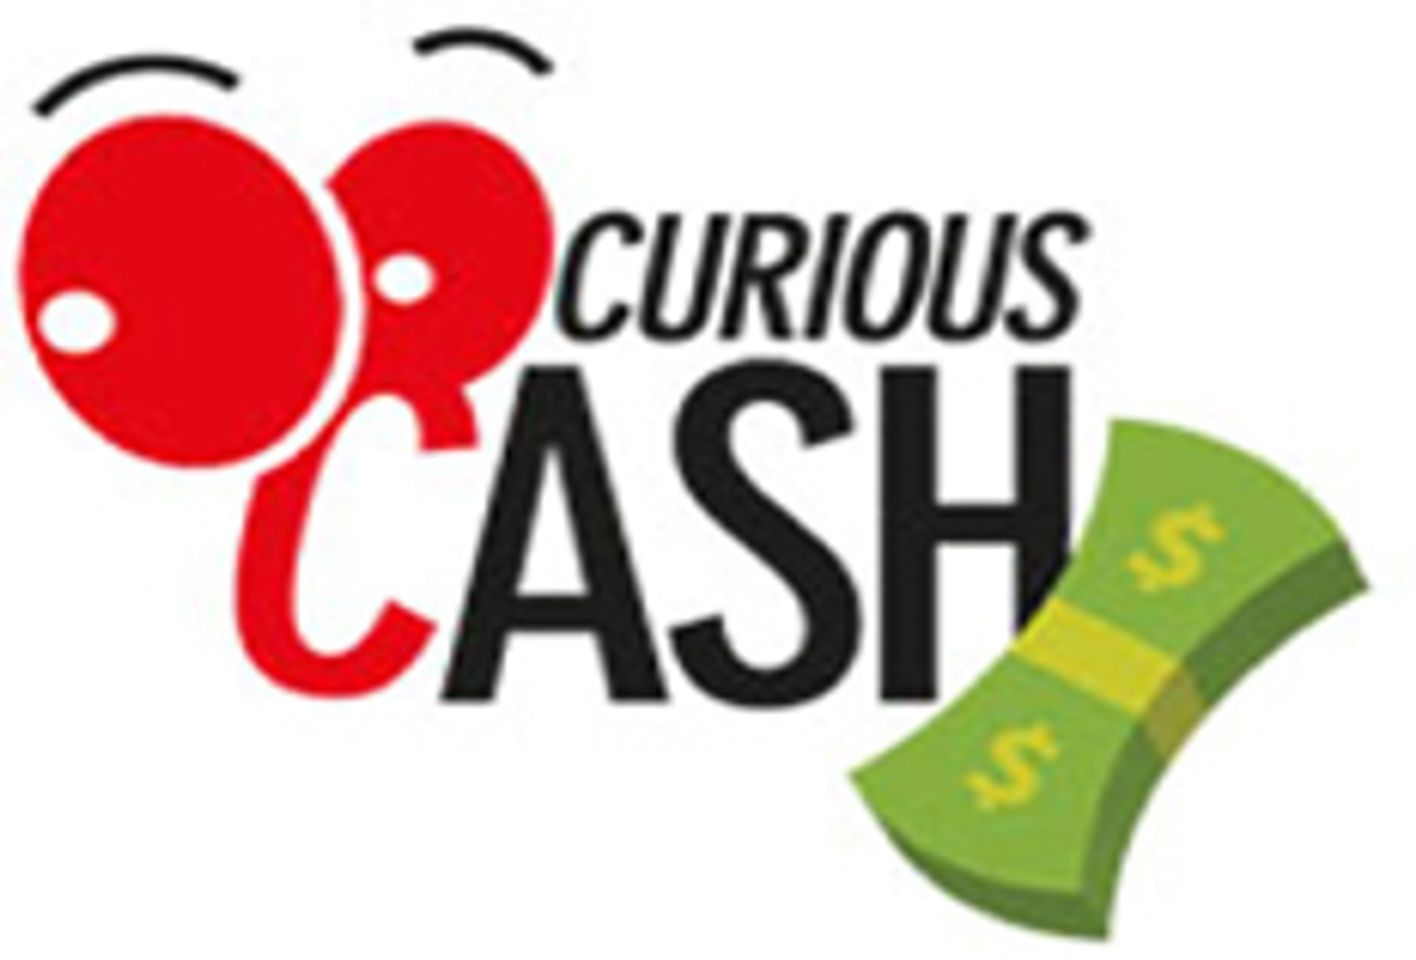 CuriousCash Launches New Website